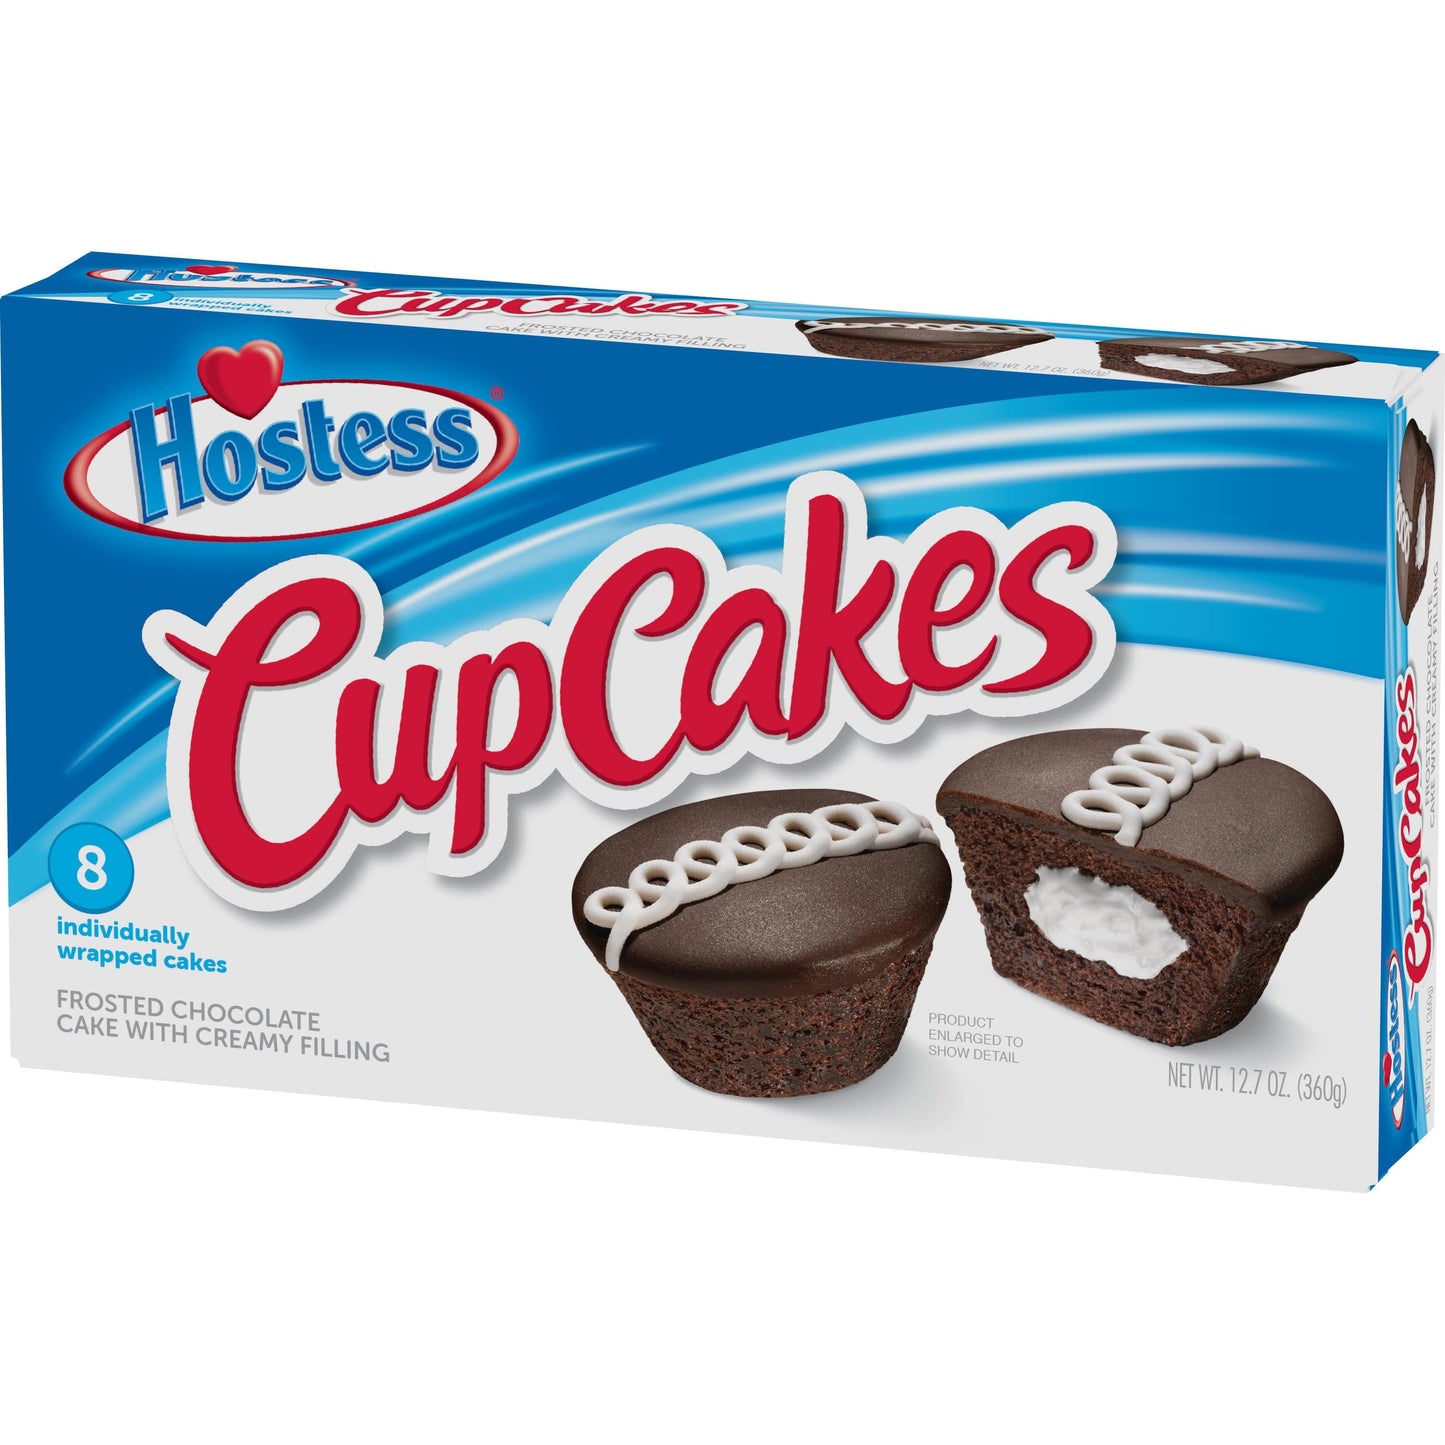 HOSTESS Chocolate Cup Cakes, Creamy, 8 count, 12.7 oz